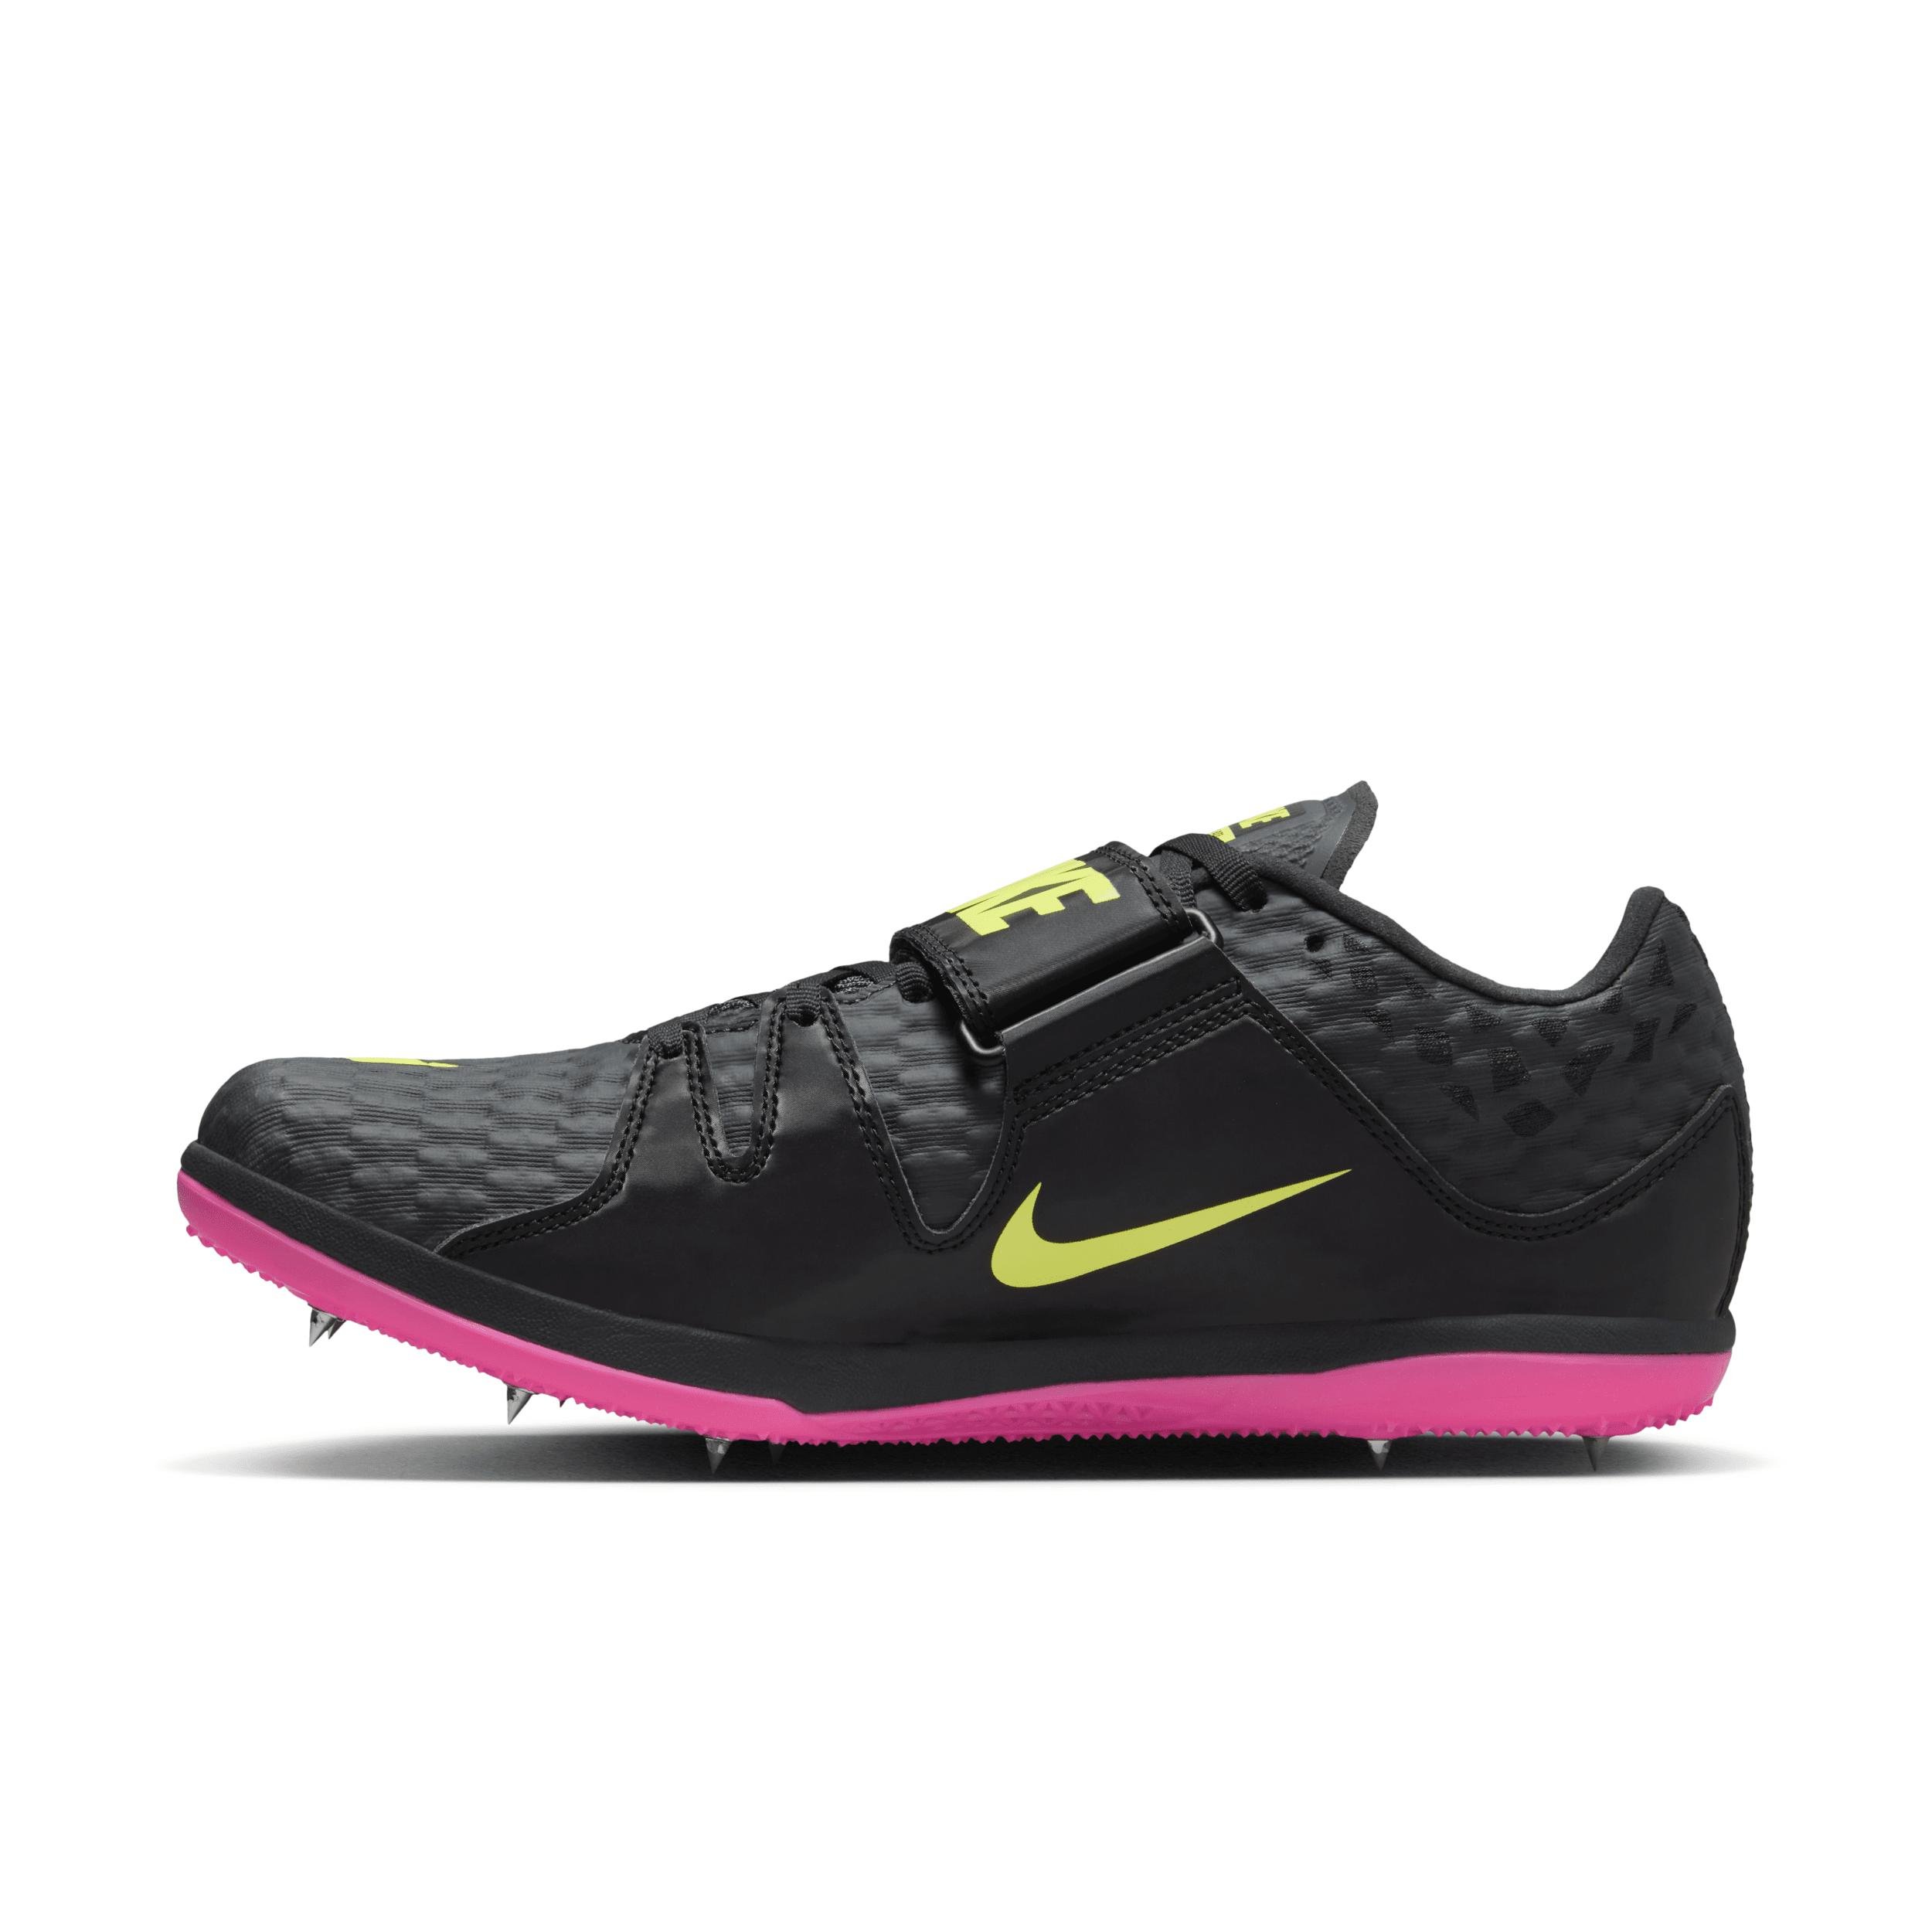 Nike Unisex High Jump Elite Track & Field Jumping Spikes by NIKE